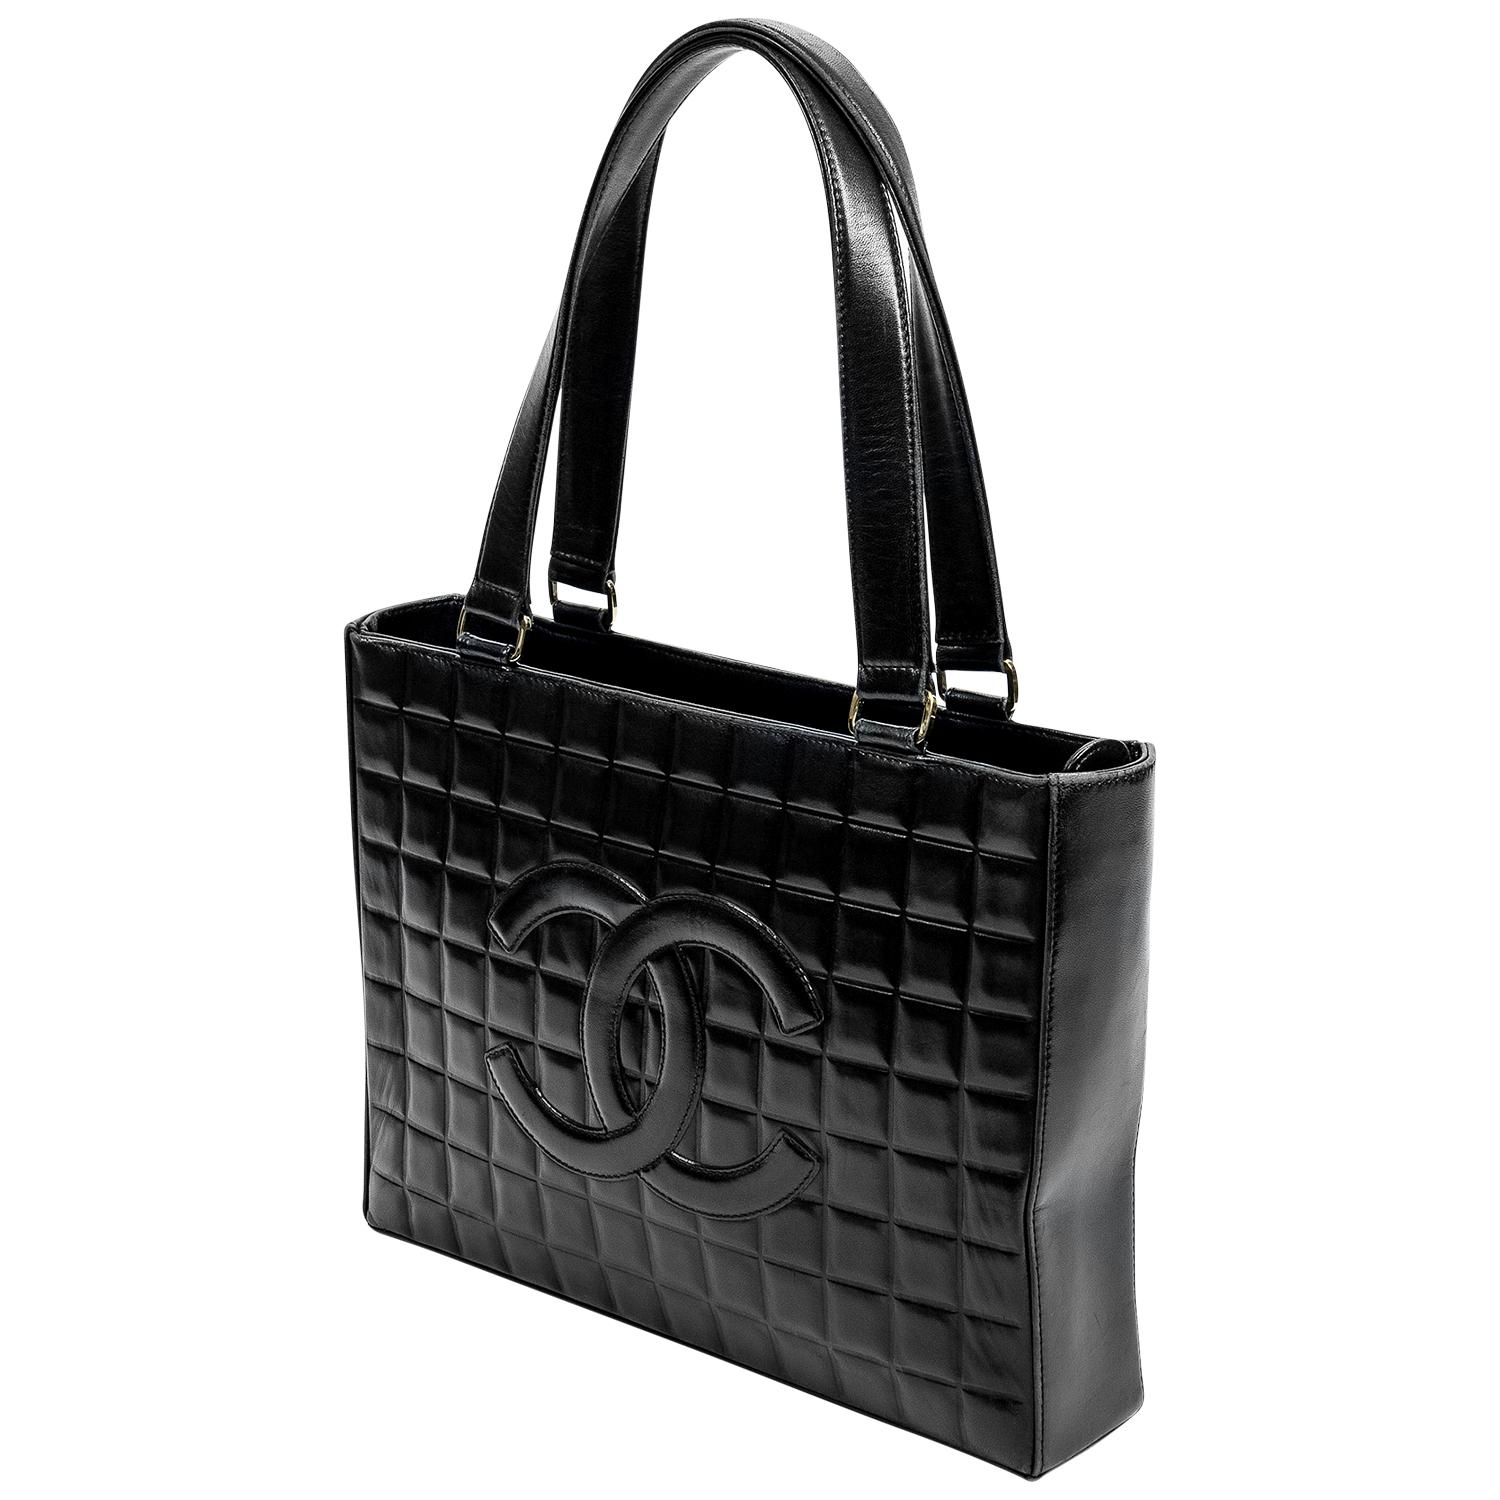 Timeless black chocolate bar shopping tote crafted in black quilted leather with silver-tone hardware, dual shoulder straps, the top zip closure opens up to a grosgrain lining with a single interior pocket. For added practicality, there are